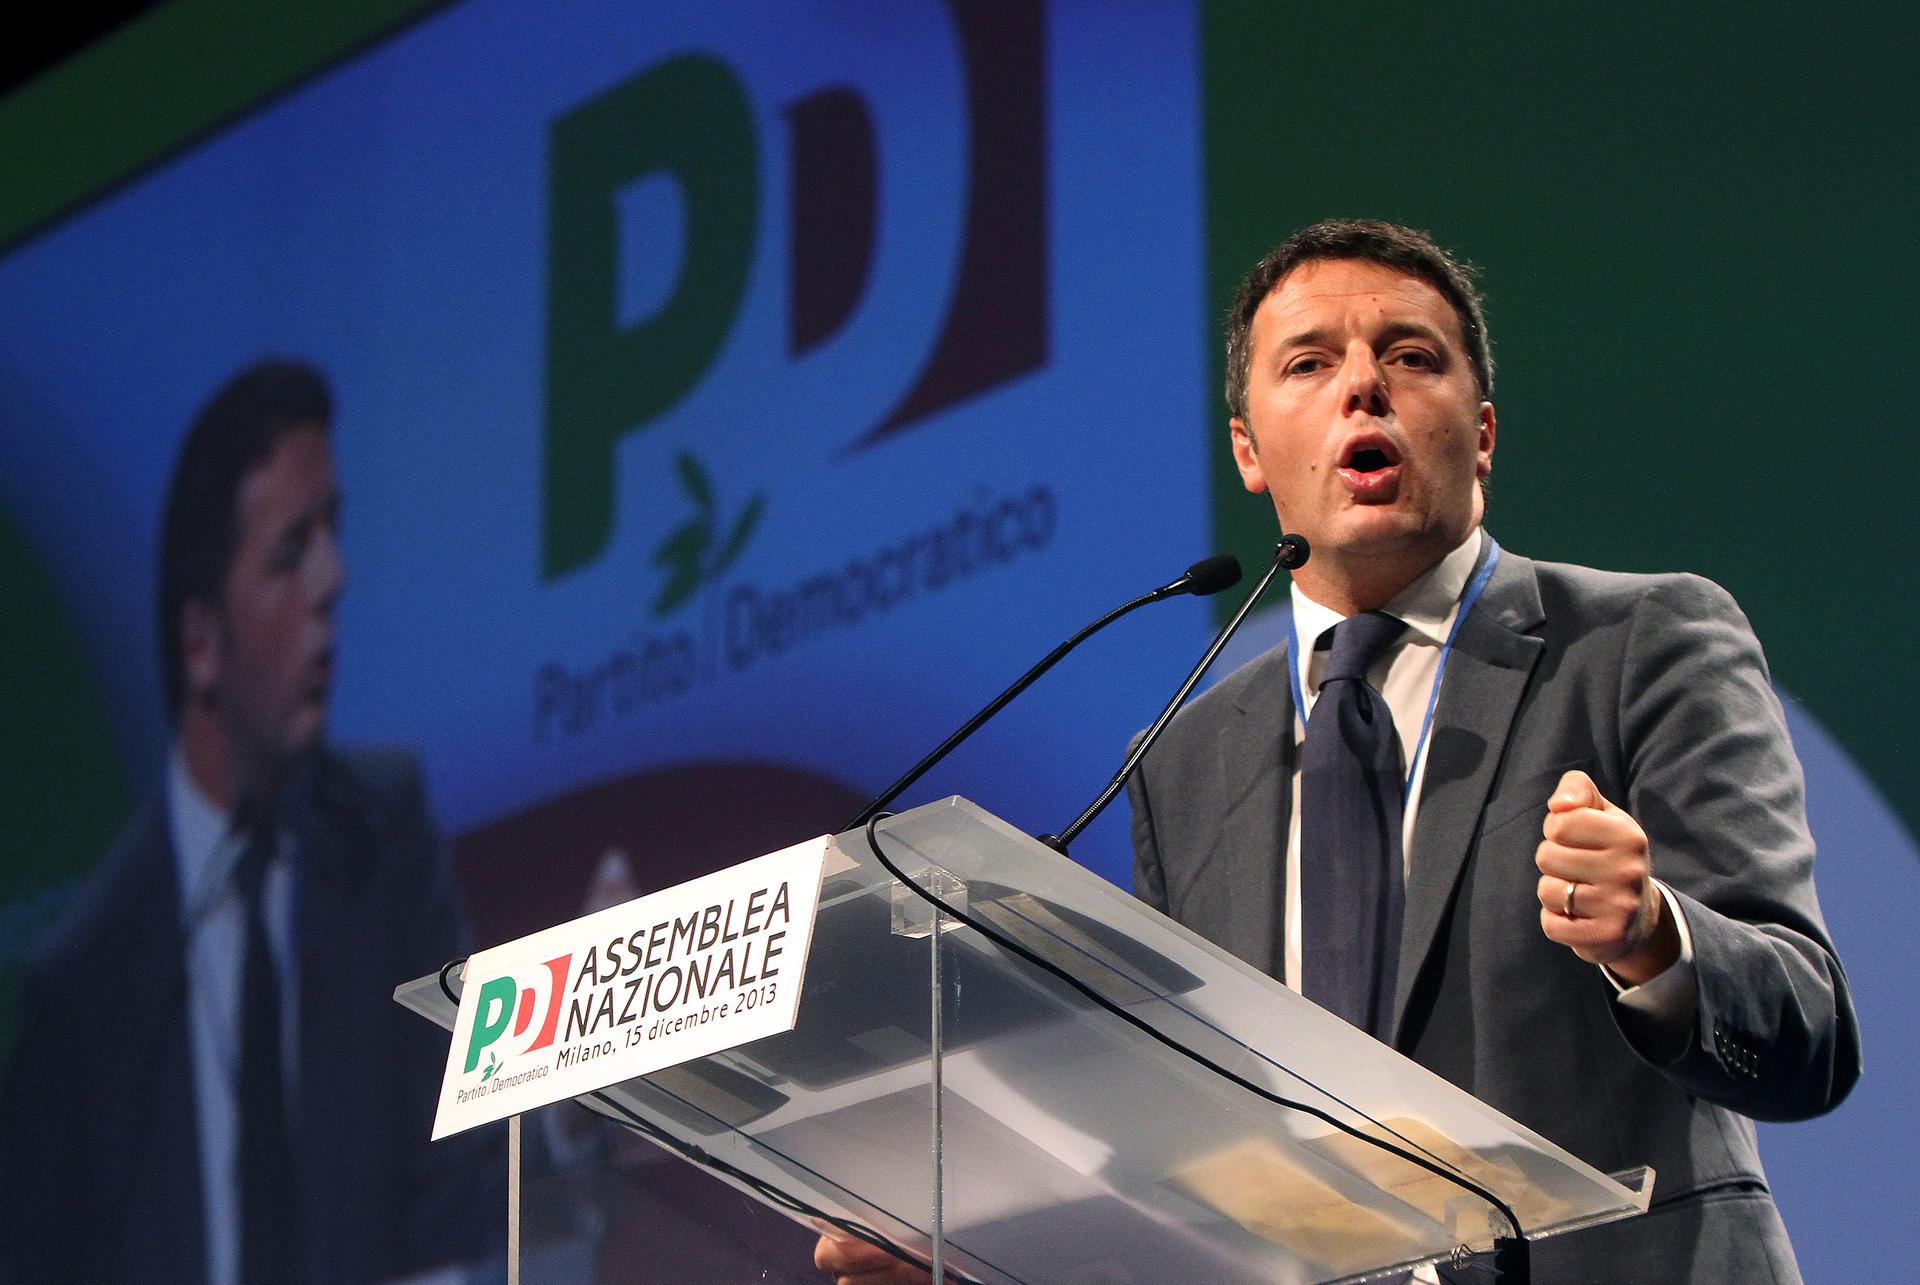 Matteo Renzi looks set to become Italy's new Prime Minister